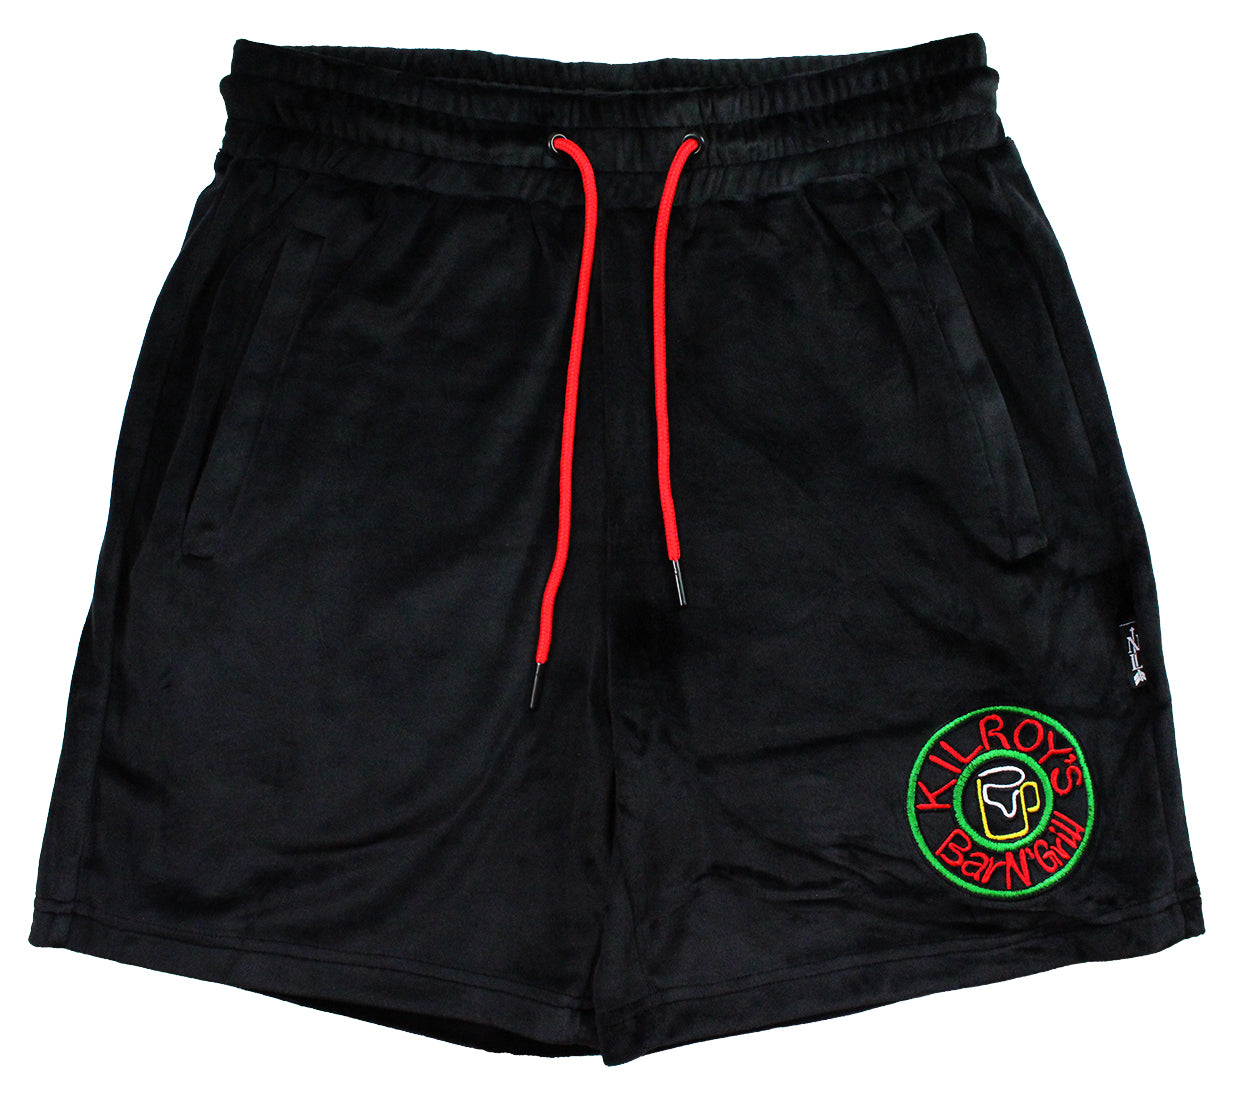 velour shorts in black/red with kilroys on kirkwood